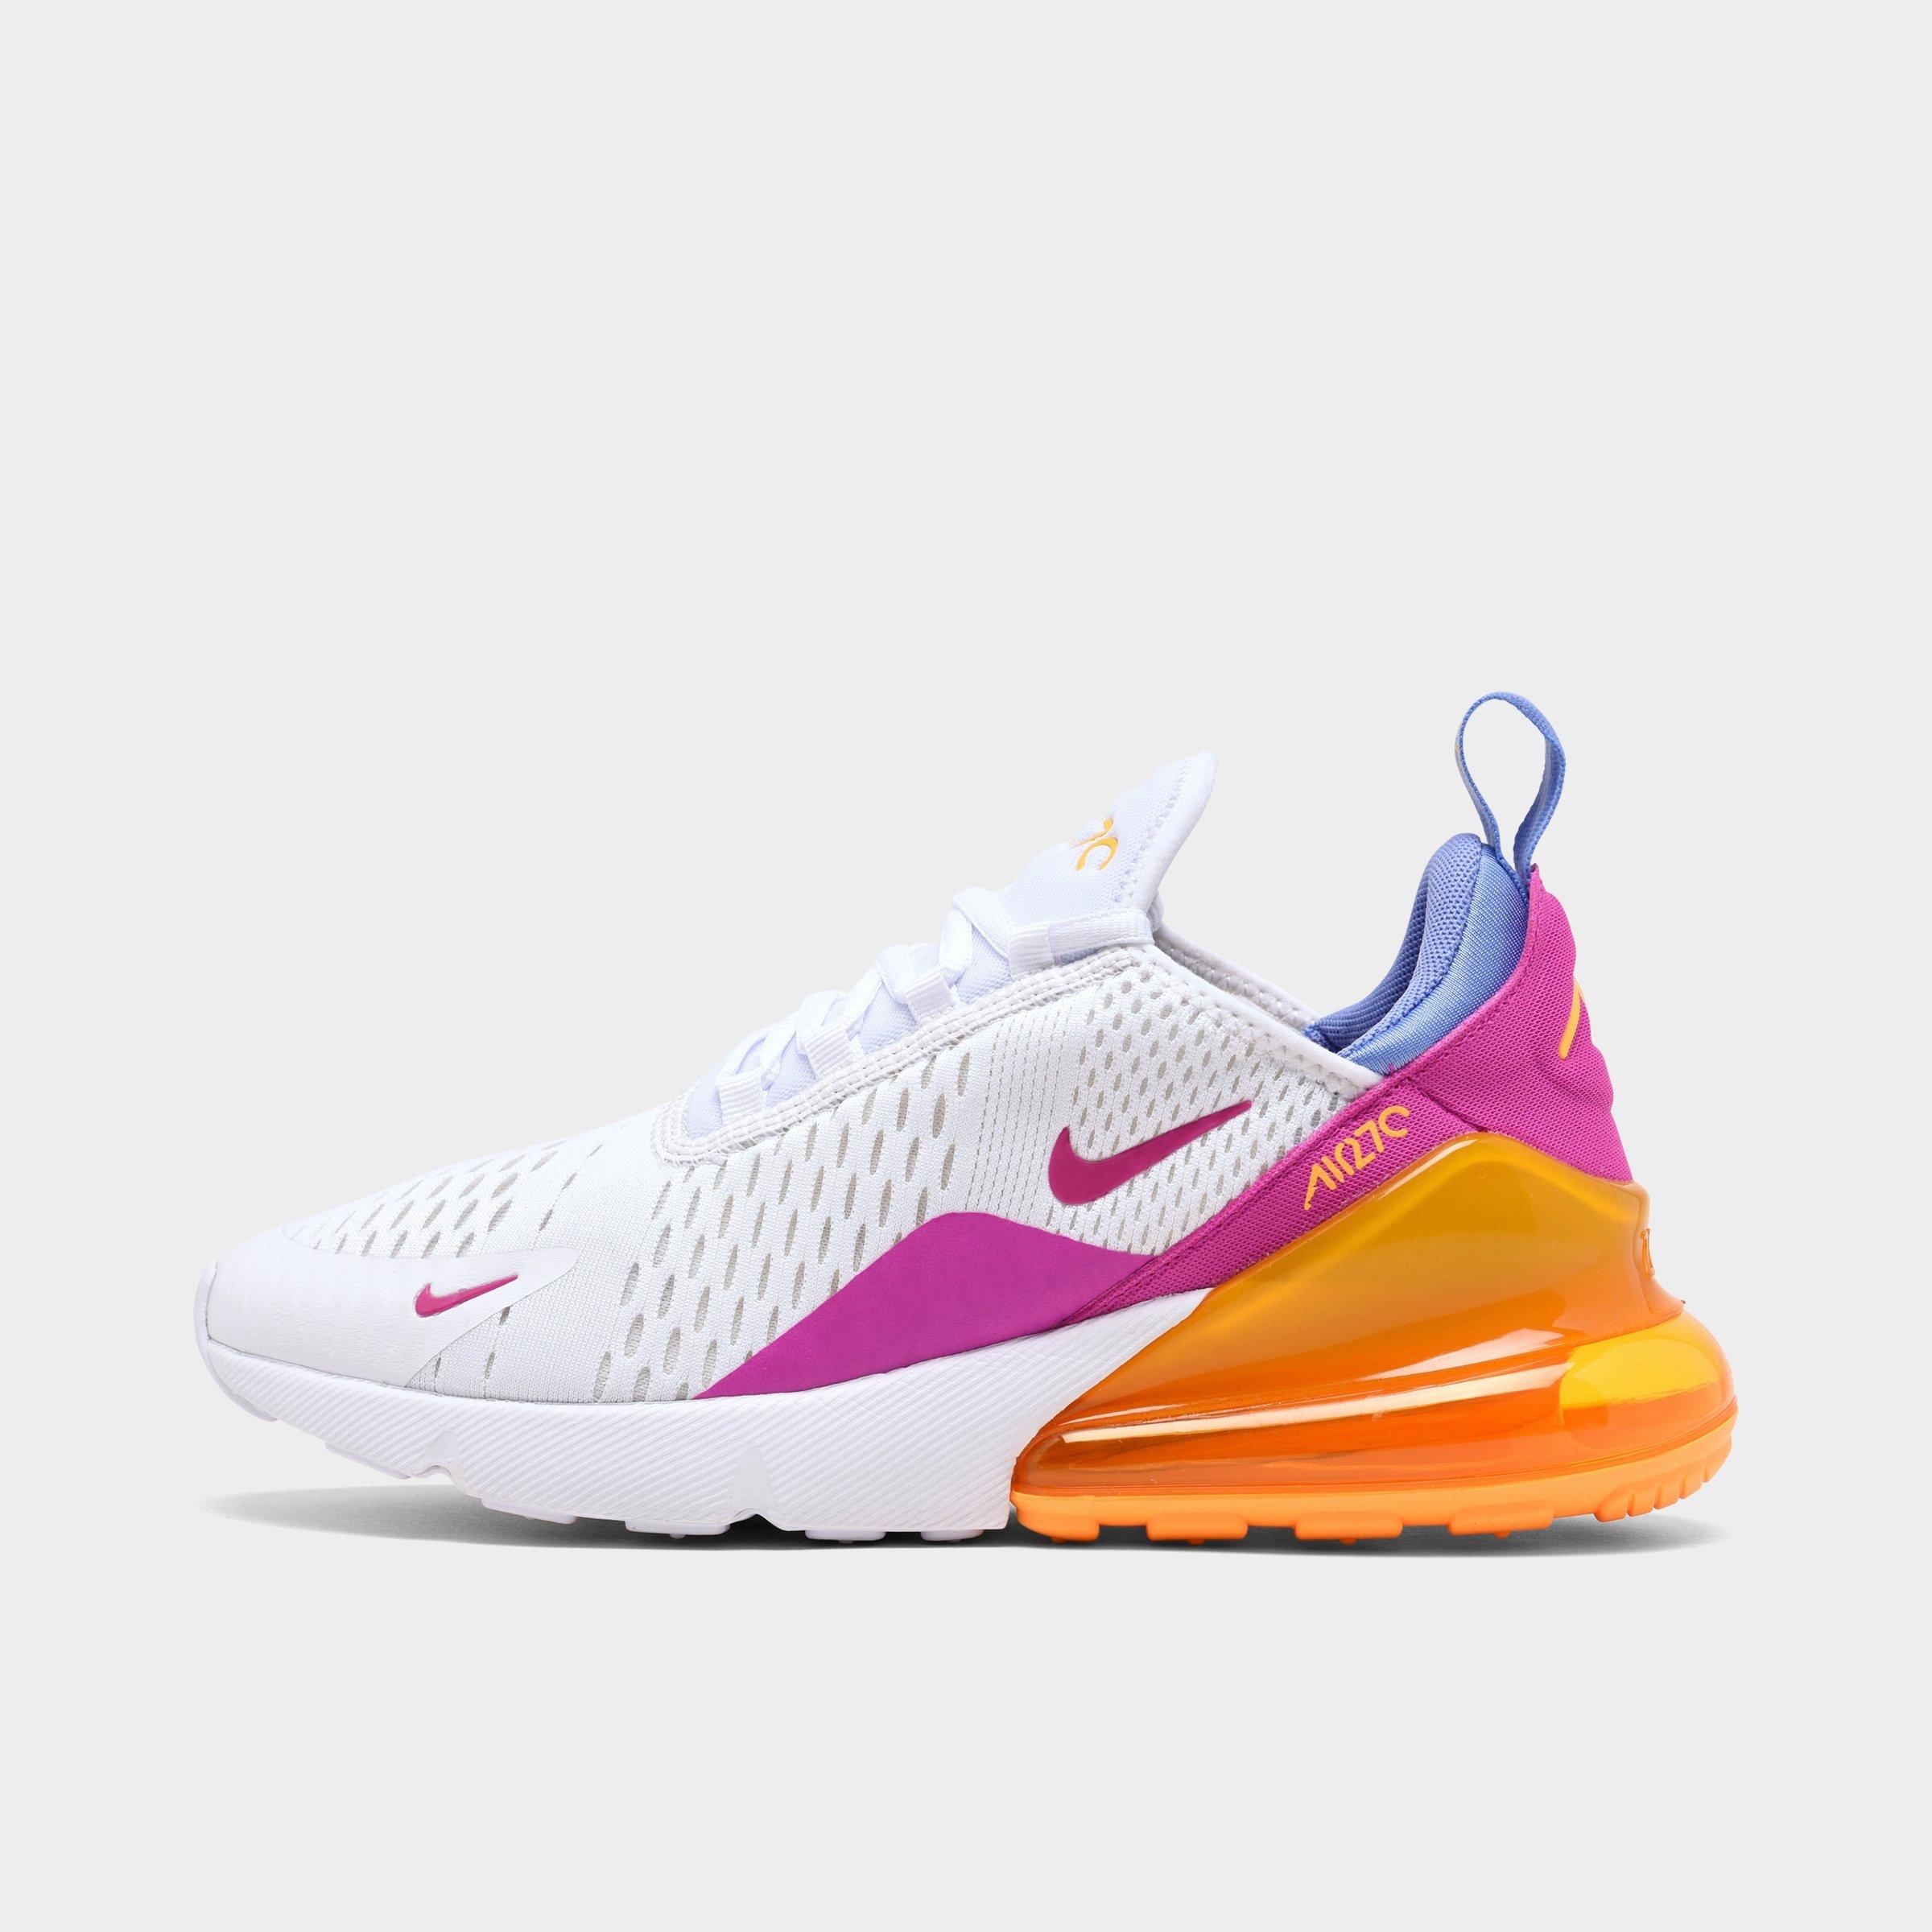 air max 270 flyknit finish line